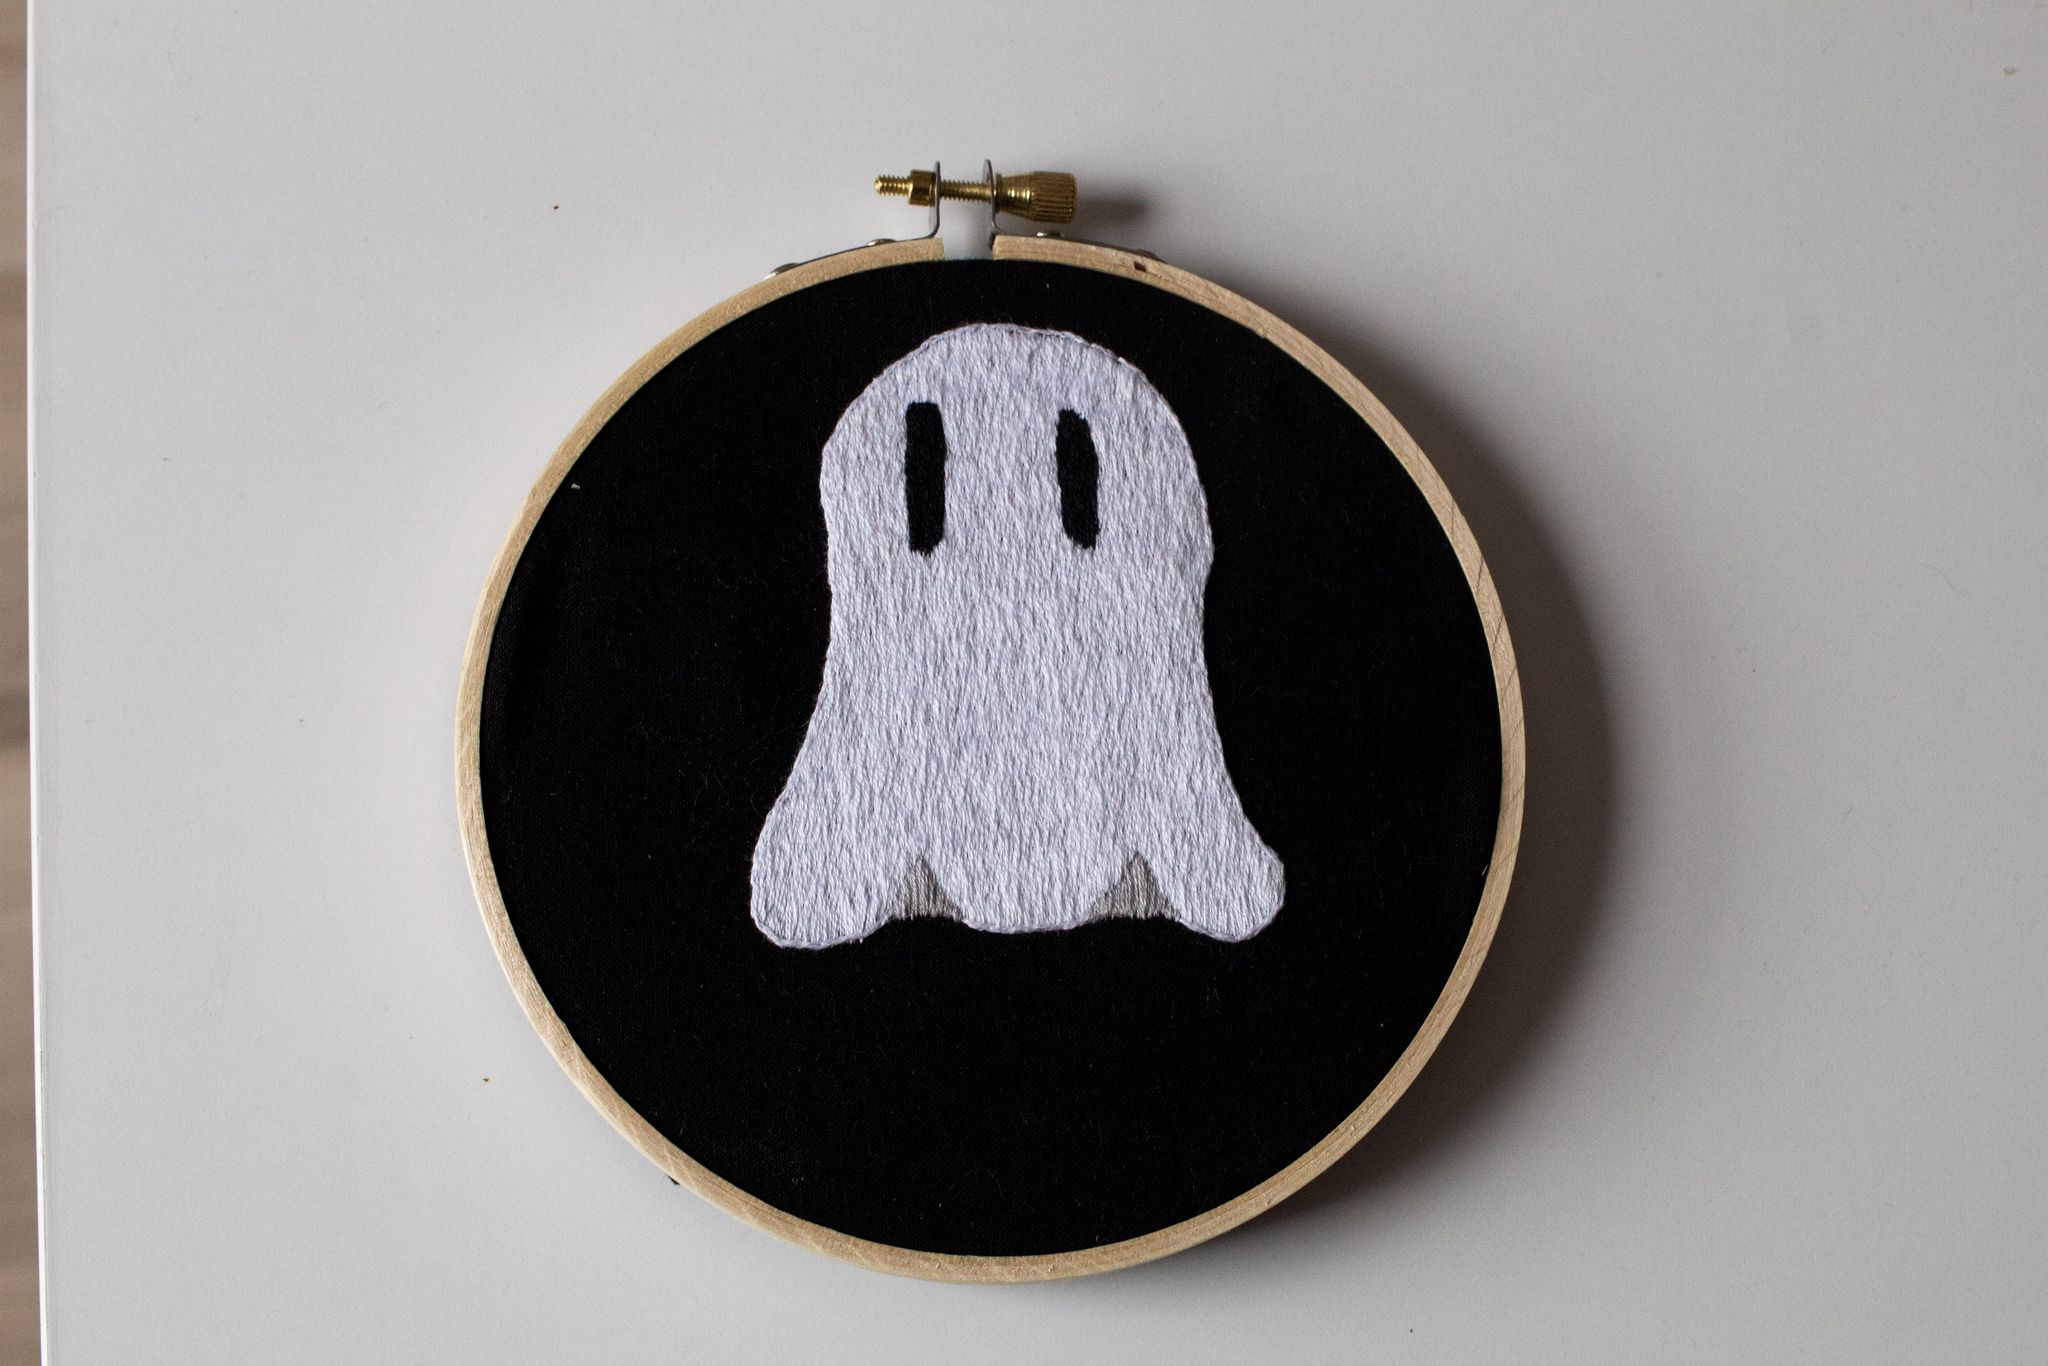 Product image of "Lonely Ghostie" embroidered ghost hung up on a white wall